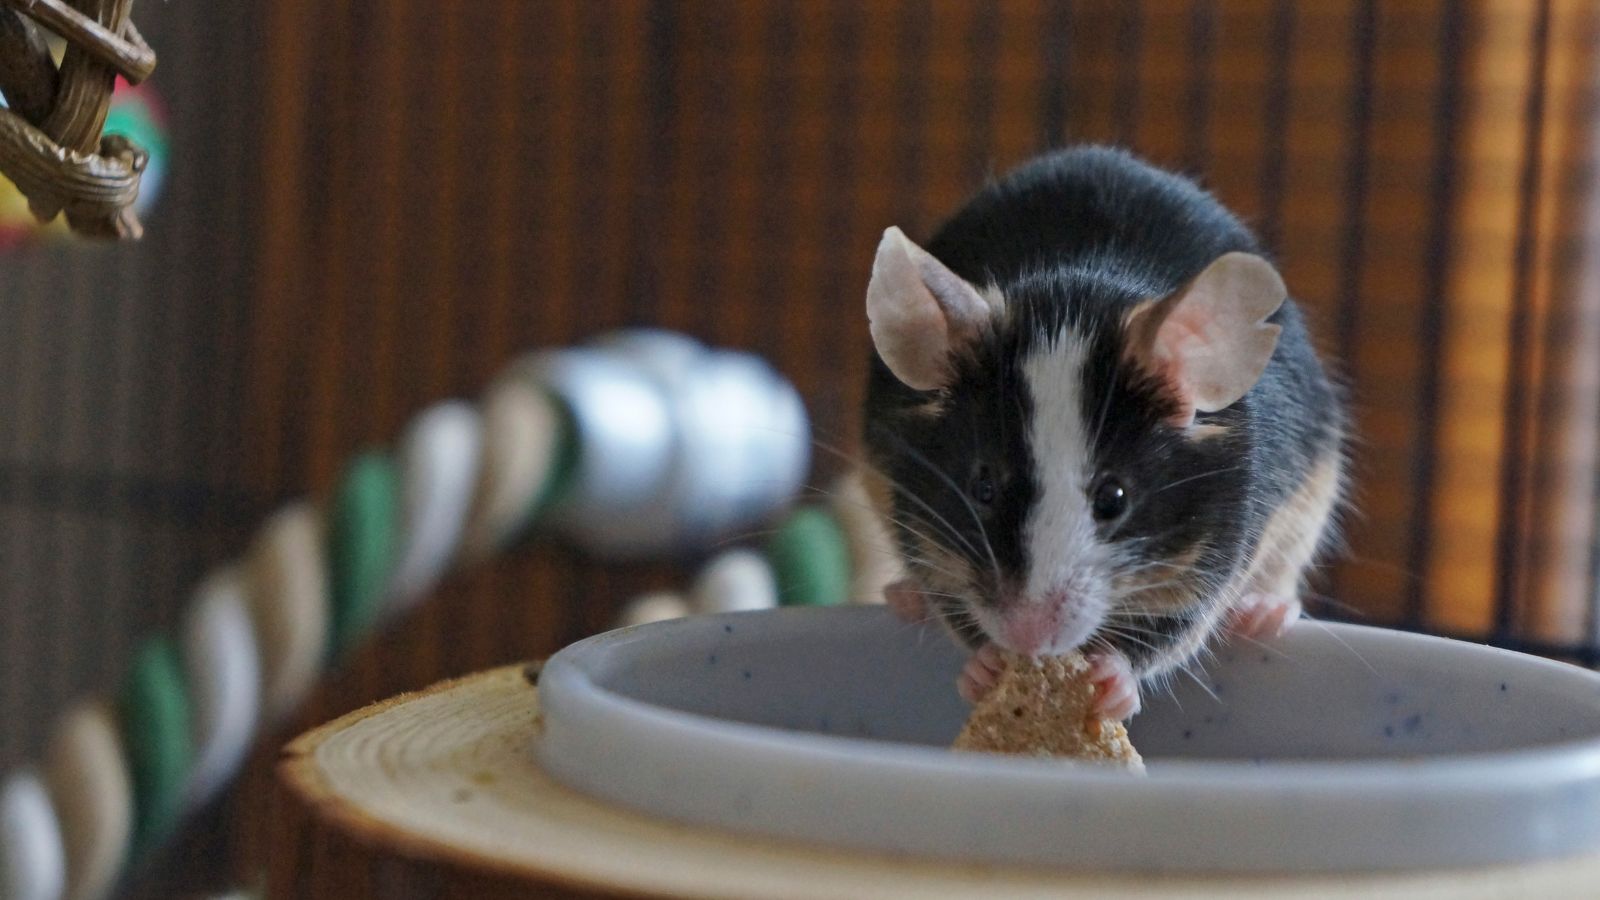 A black and white mouse eats out of a ceramic dish in their accommodation.